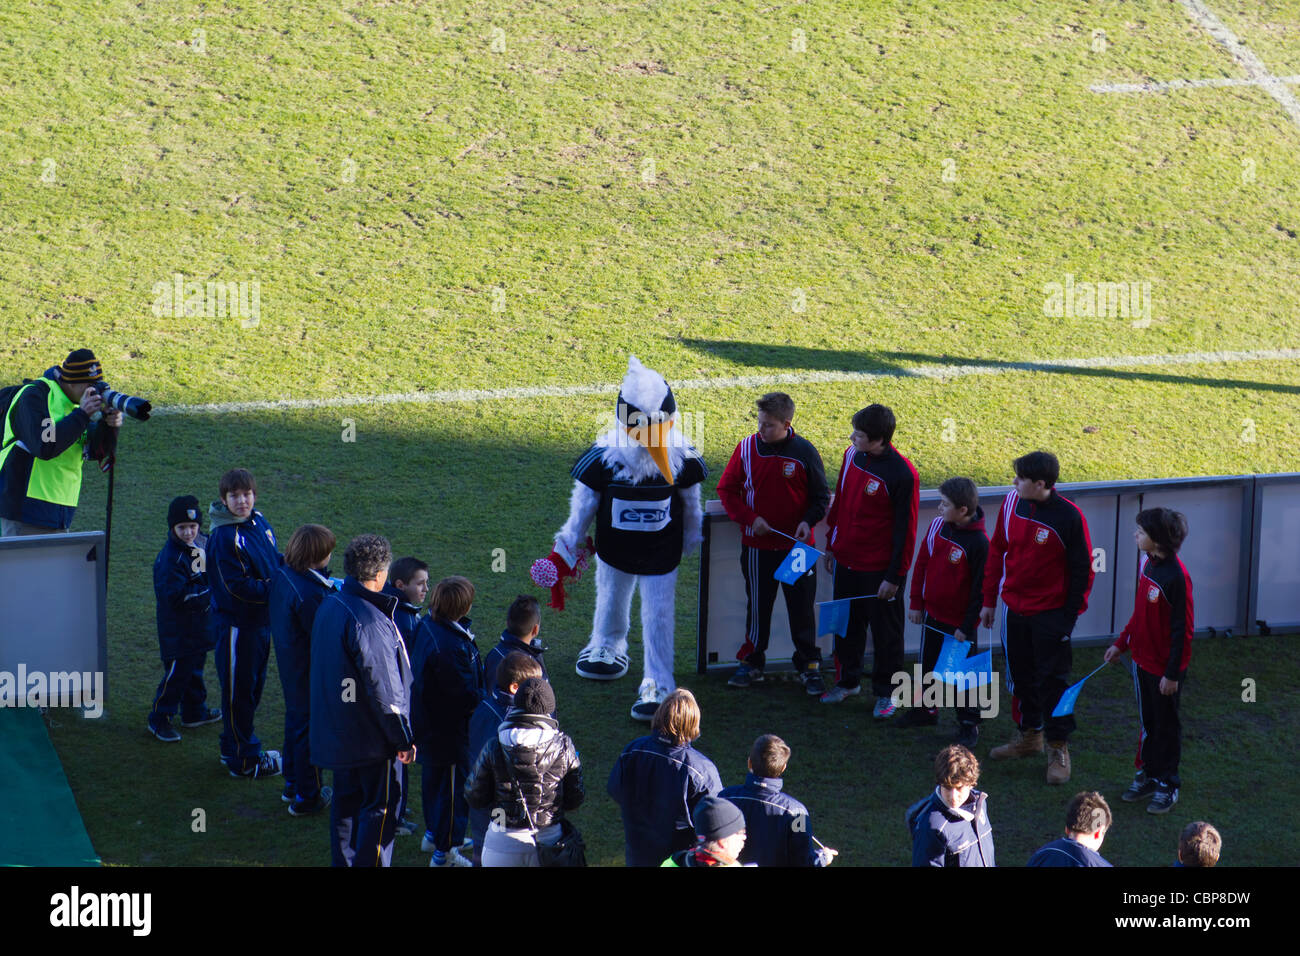 The Aironi Mascot waiting for the teams during the Heineken Cup Stock Photo